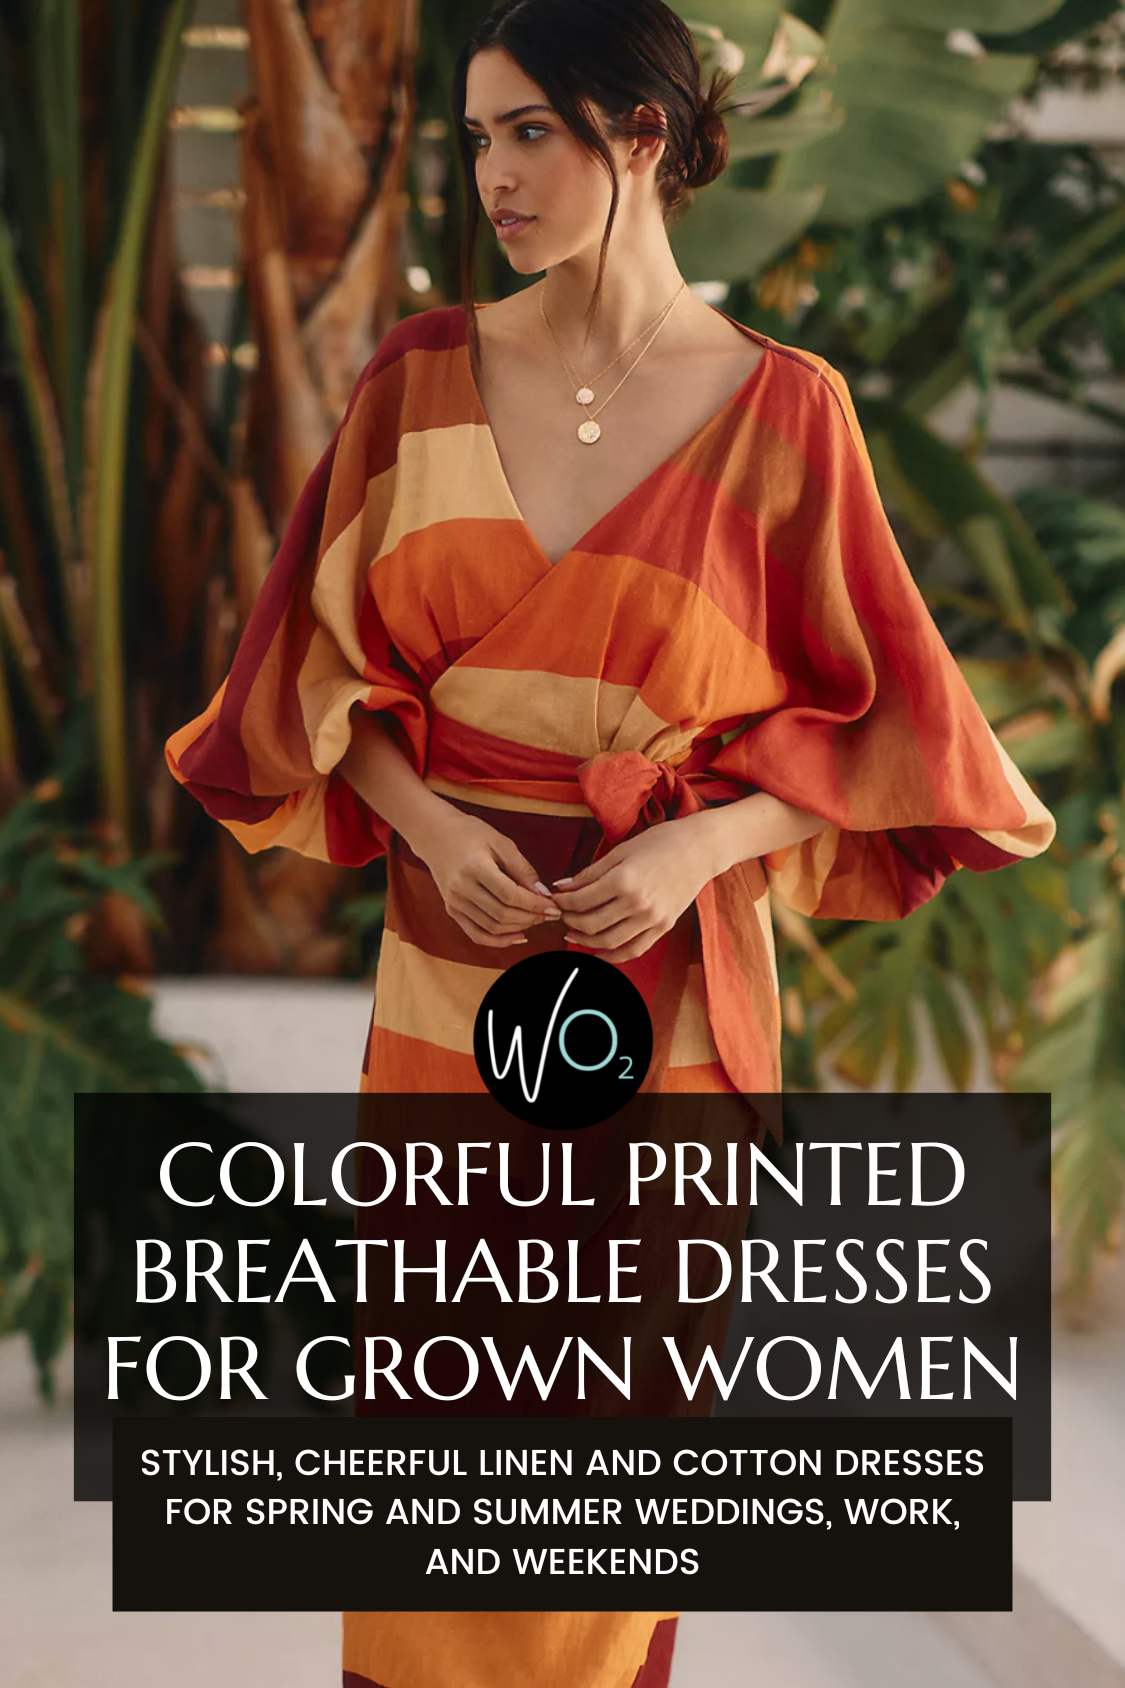 Colorful Printed Breathable Dresses for Grown Women